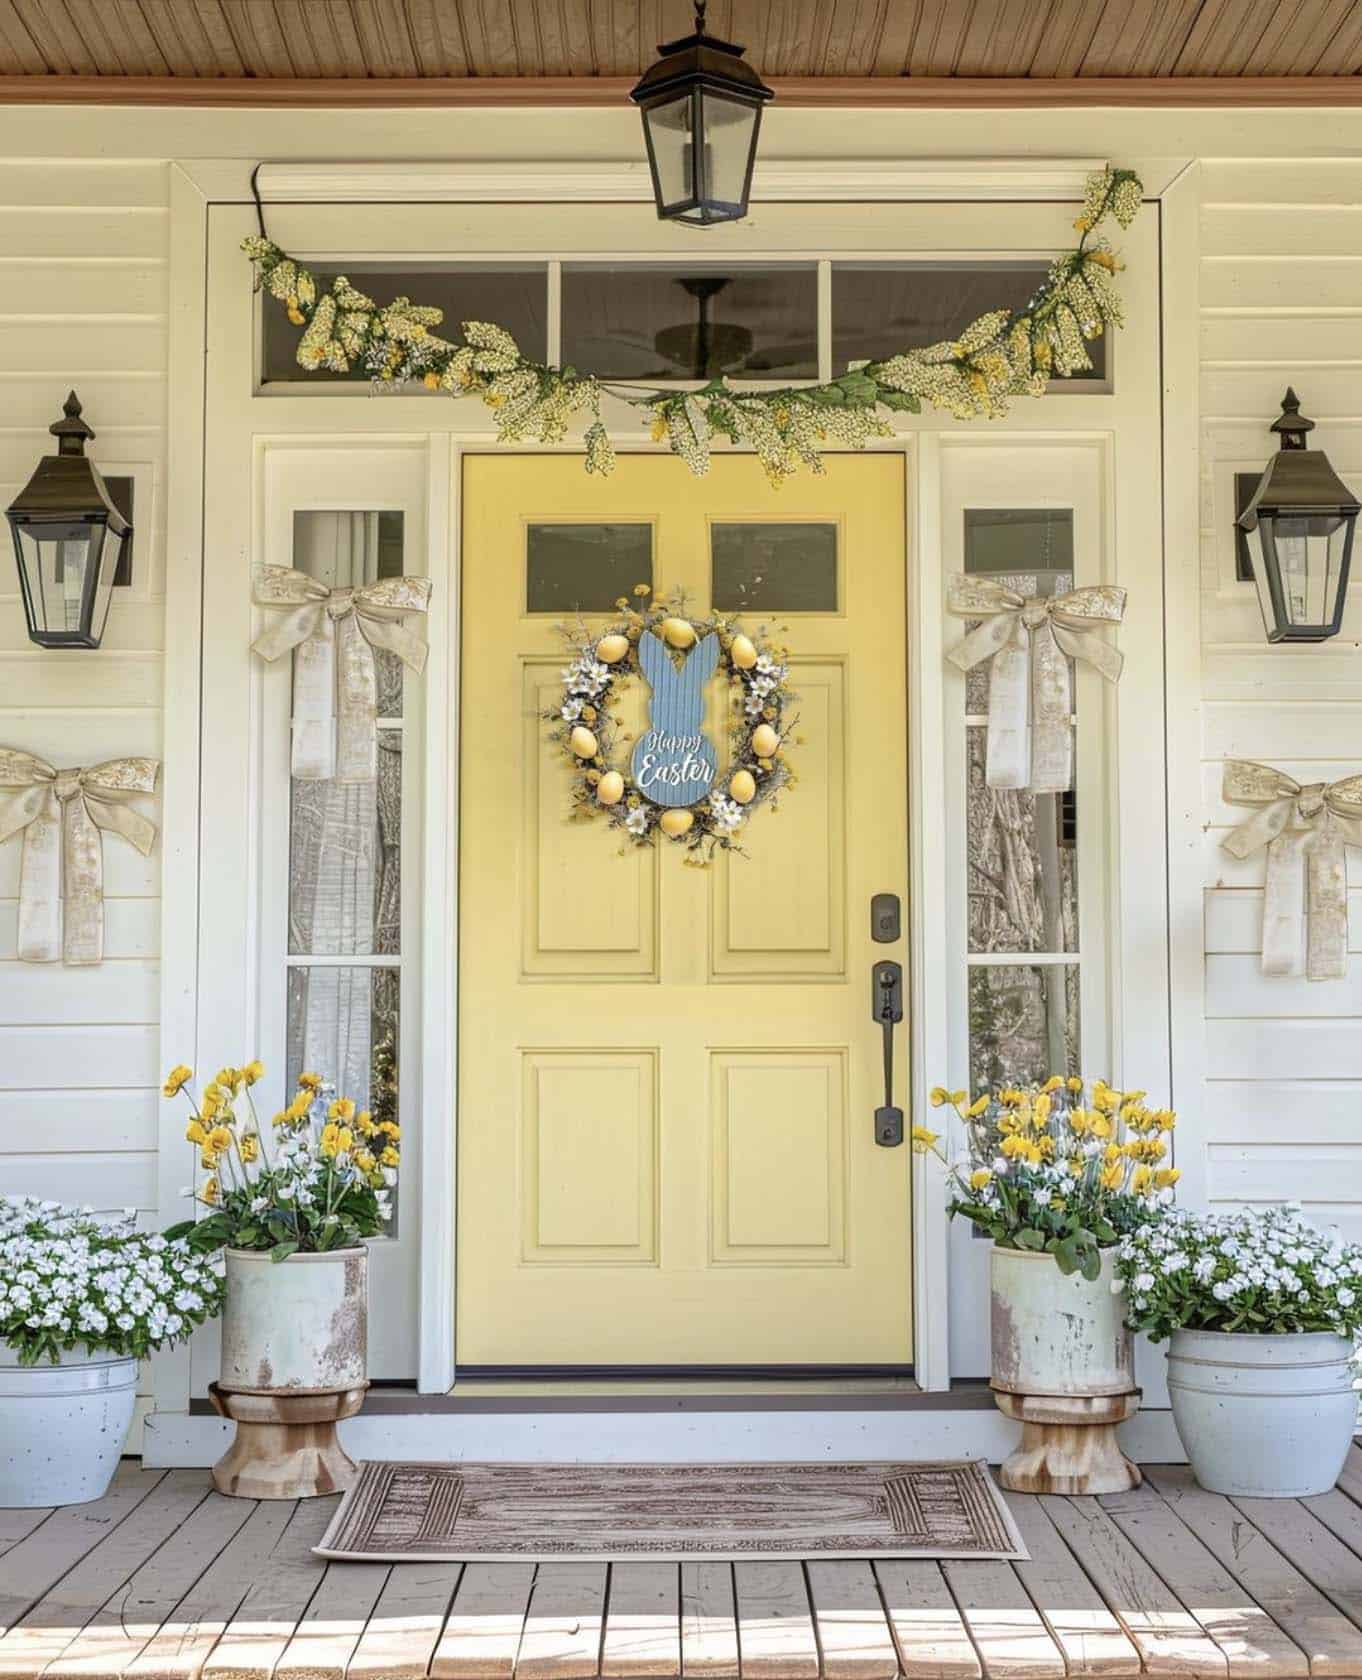 spring decor on the front porch with a yellow door